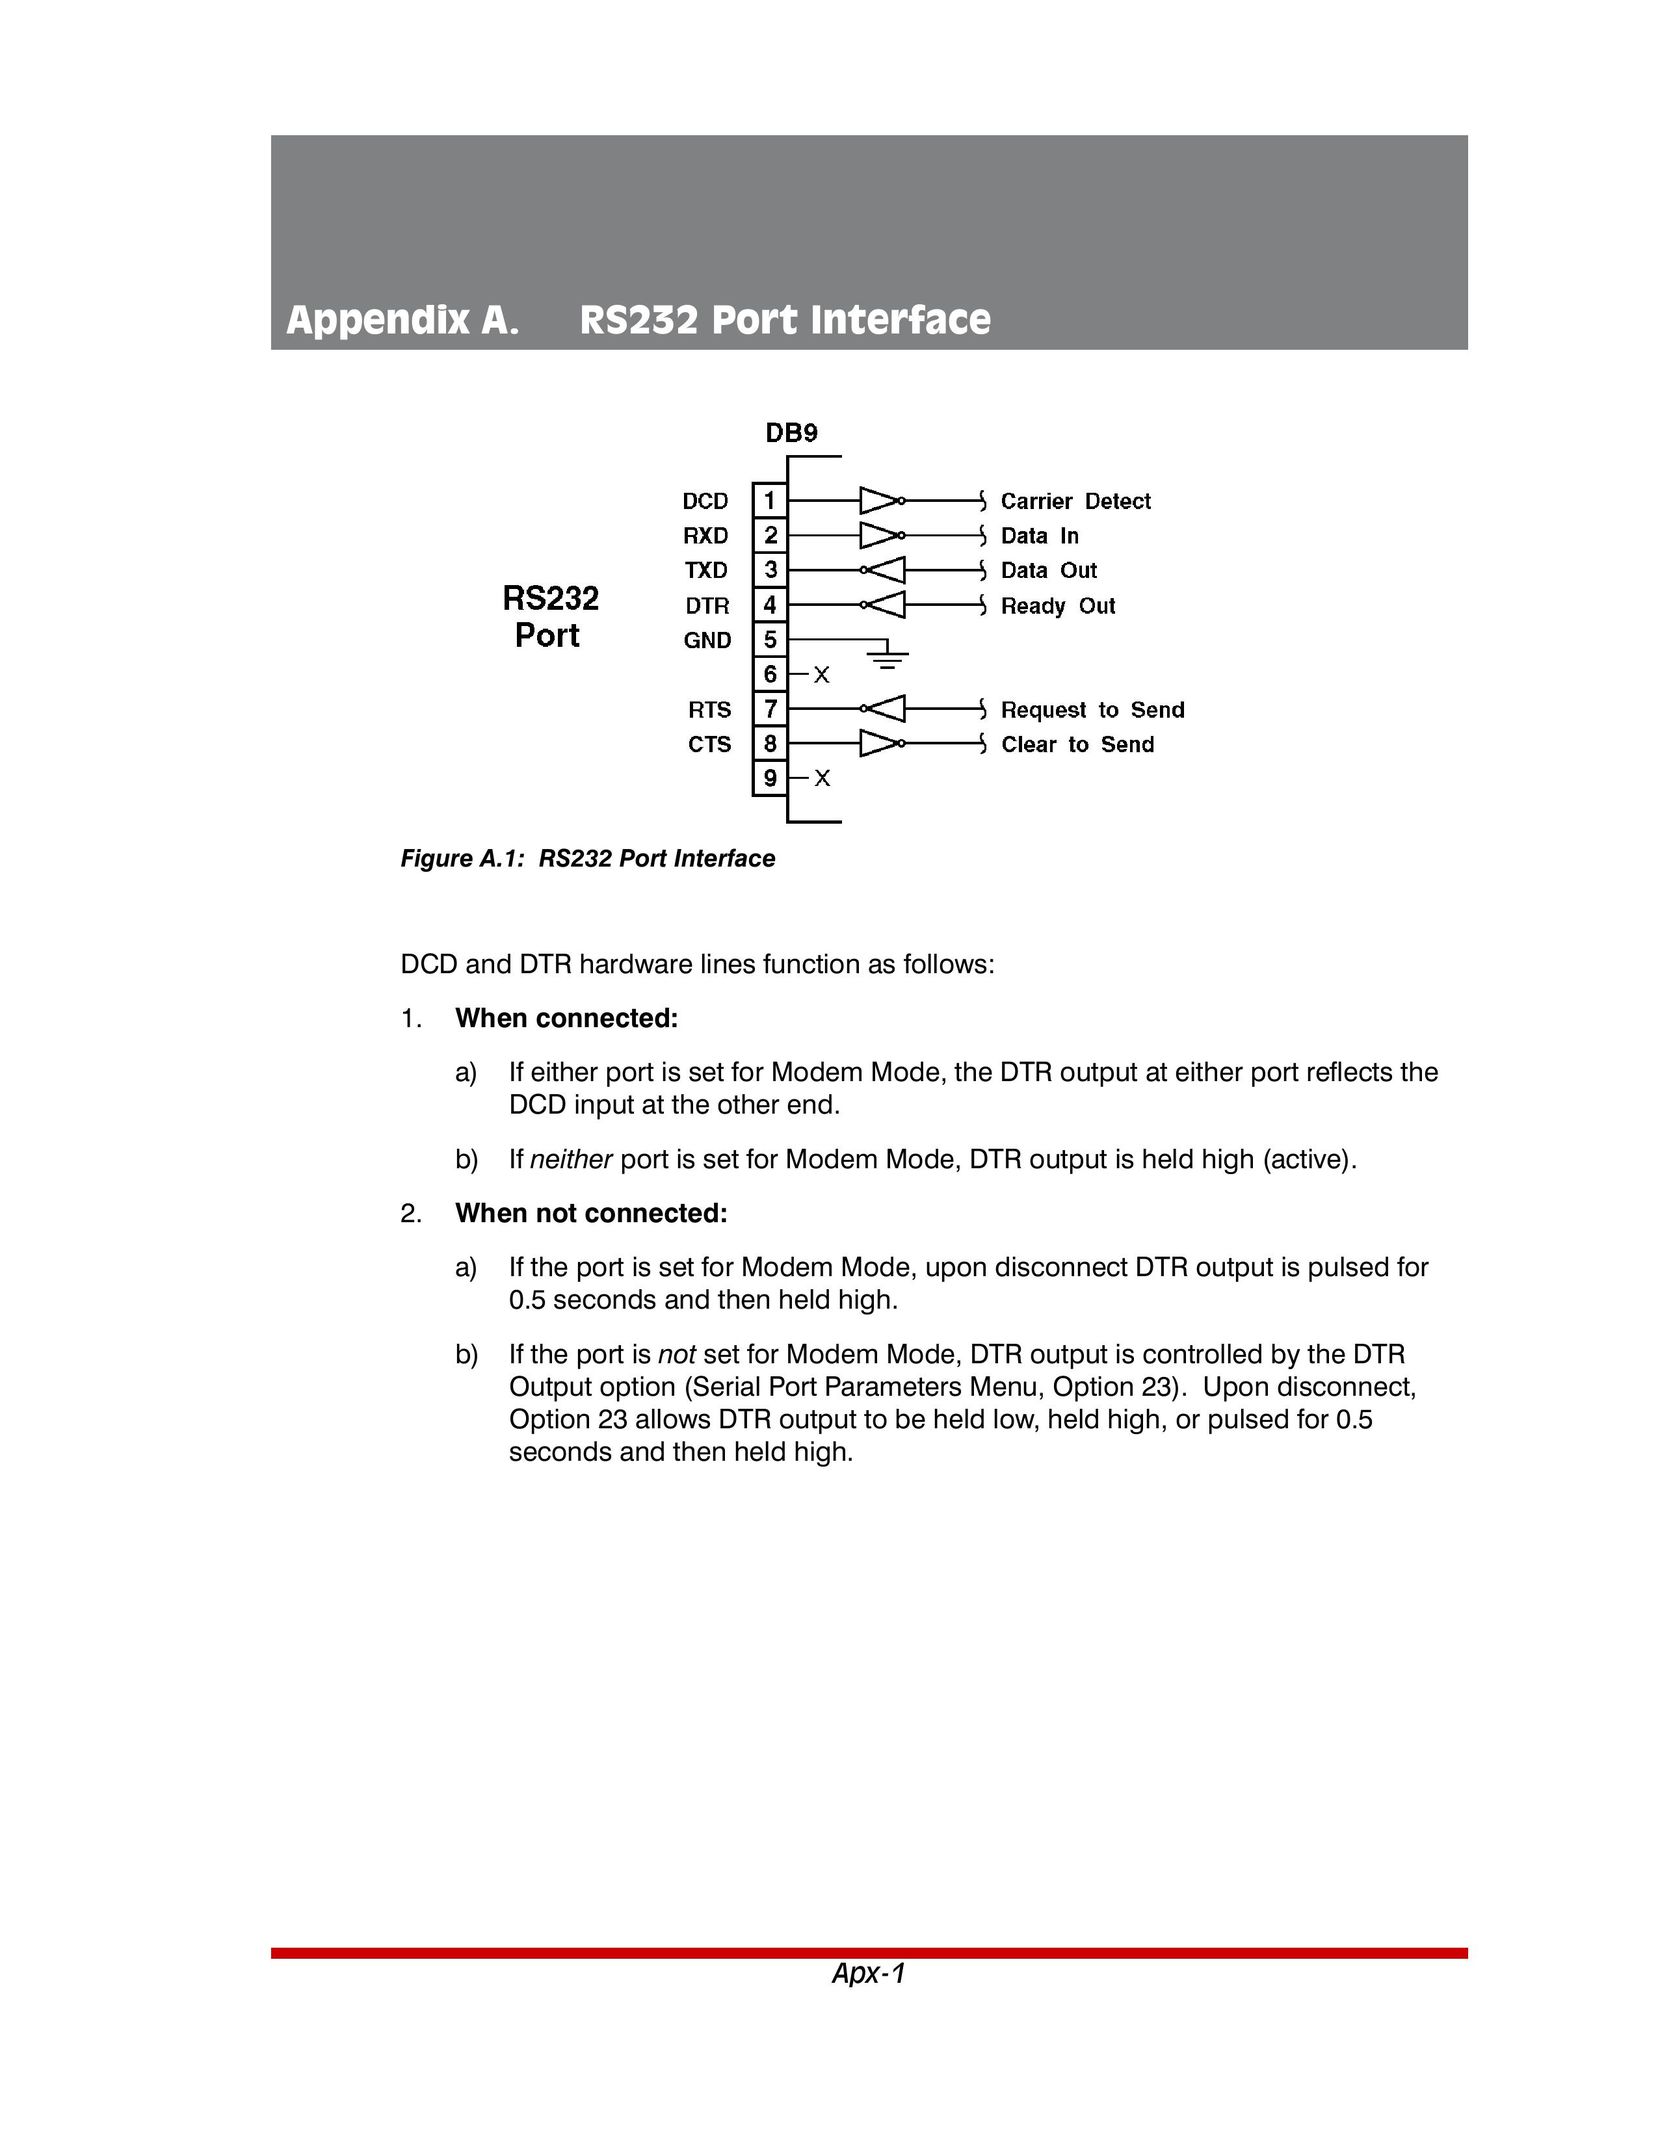 Western Telematic RSM-32 Video Gaming Accessories User Manual (Page 113)